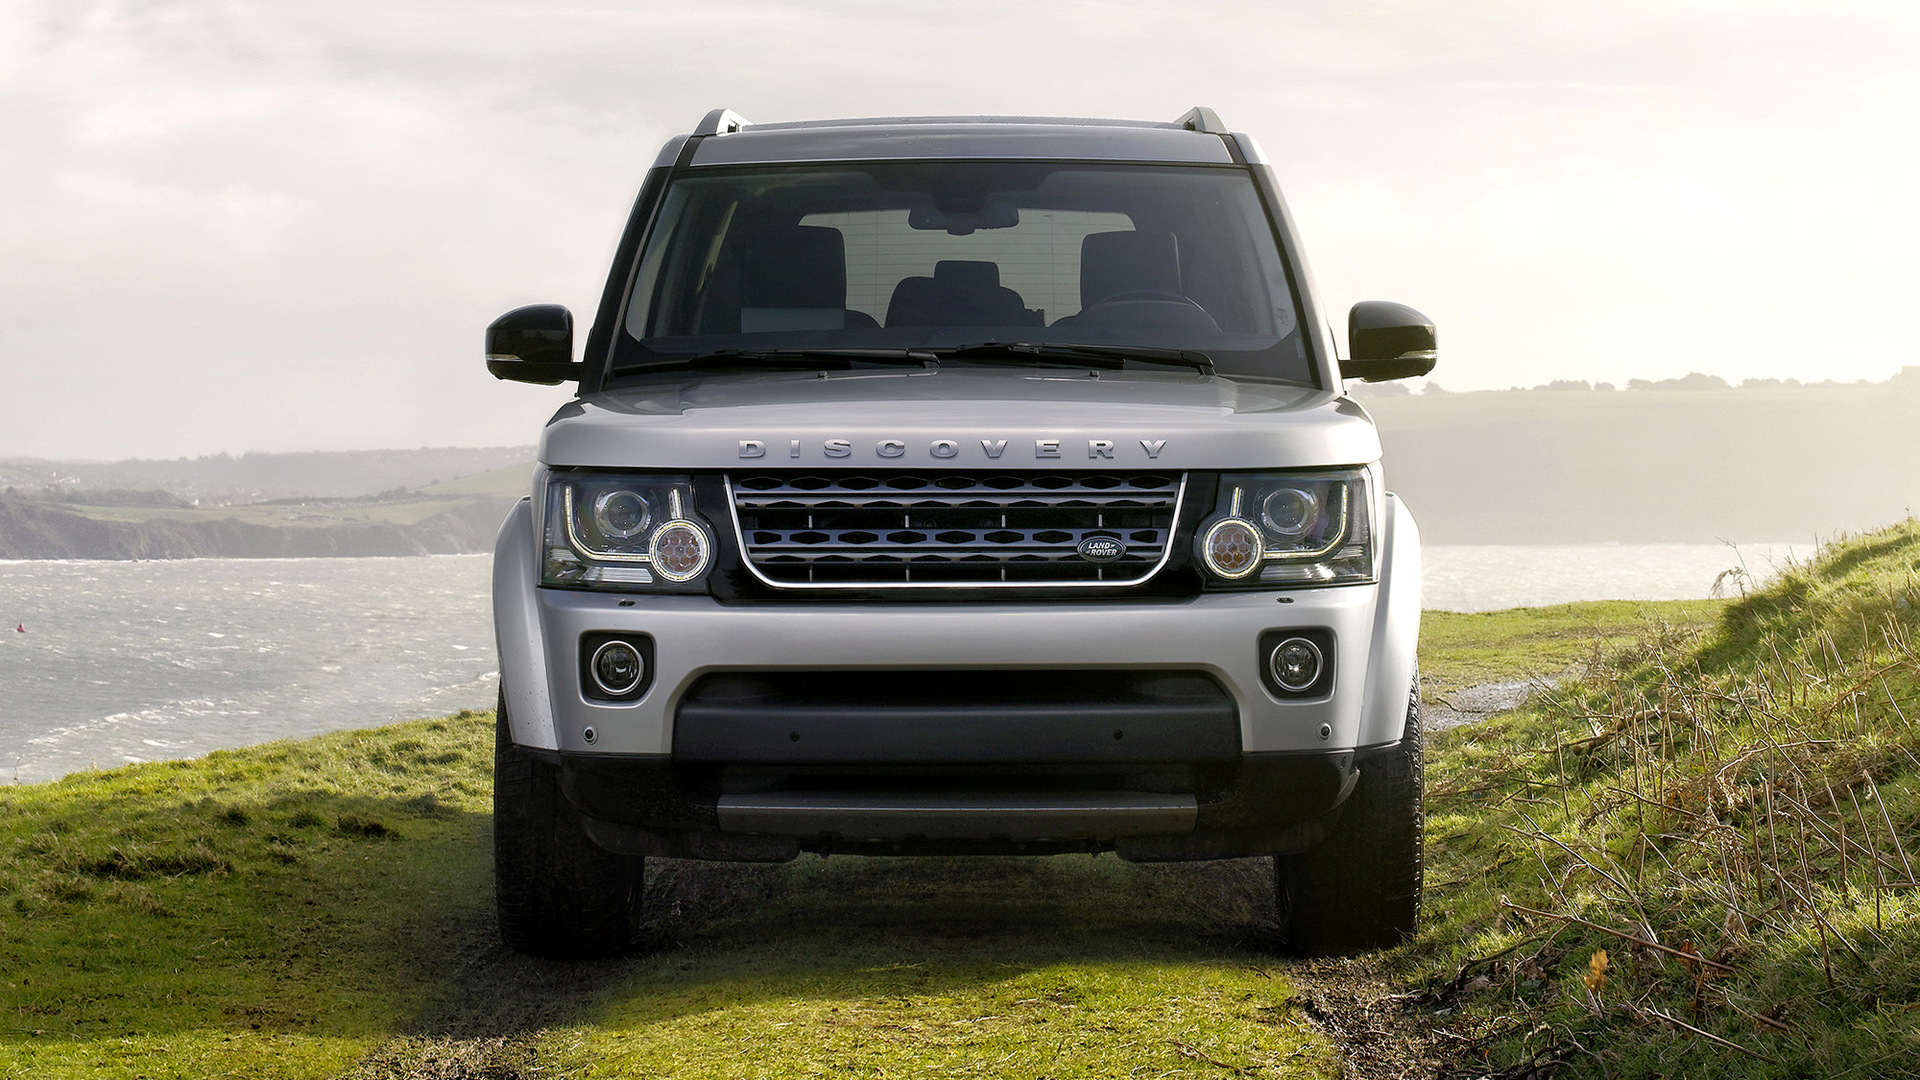 2014 Land Rover Discovery XXV Special Edition - Wallpapers and HD ...
 2014 Land Rover Discovery Wallpaper